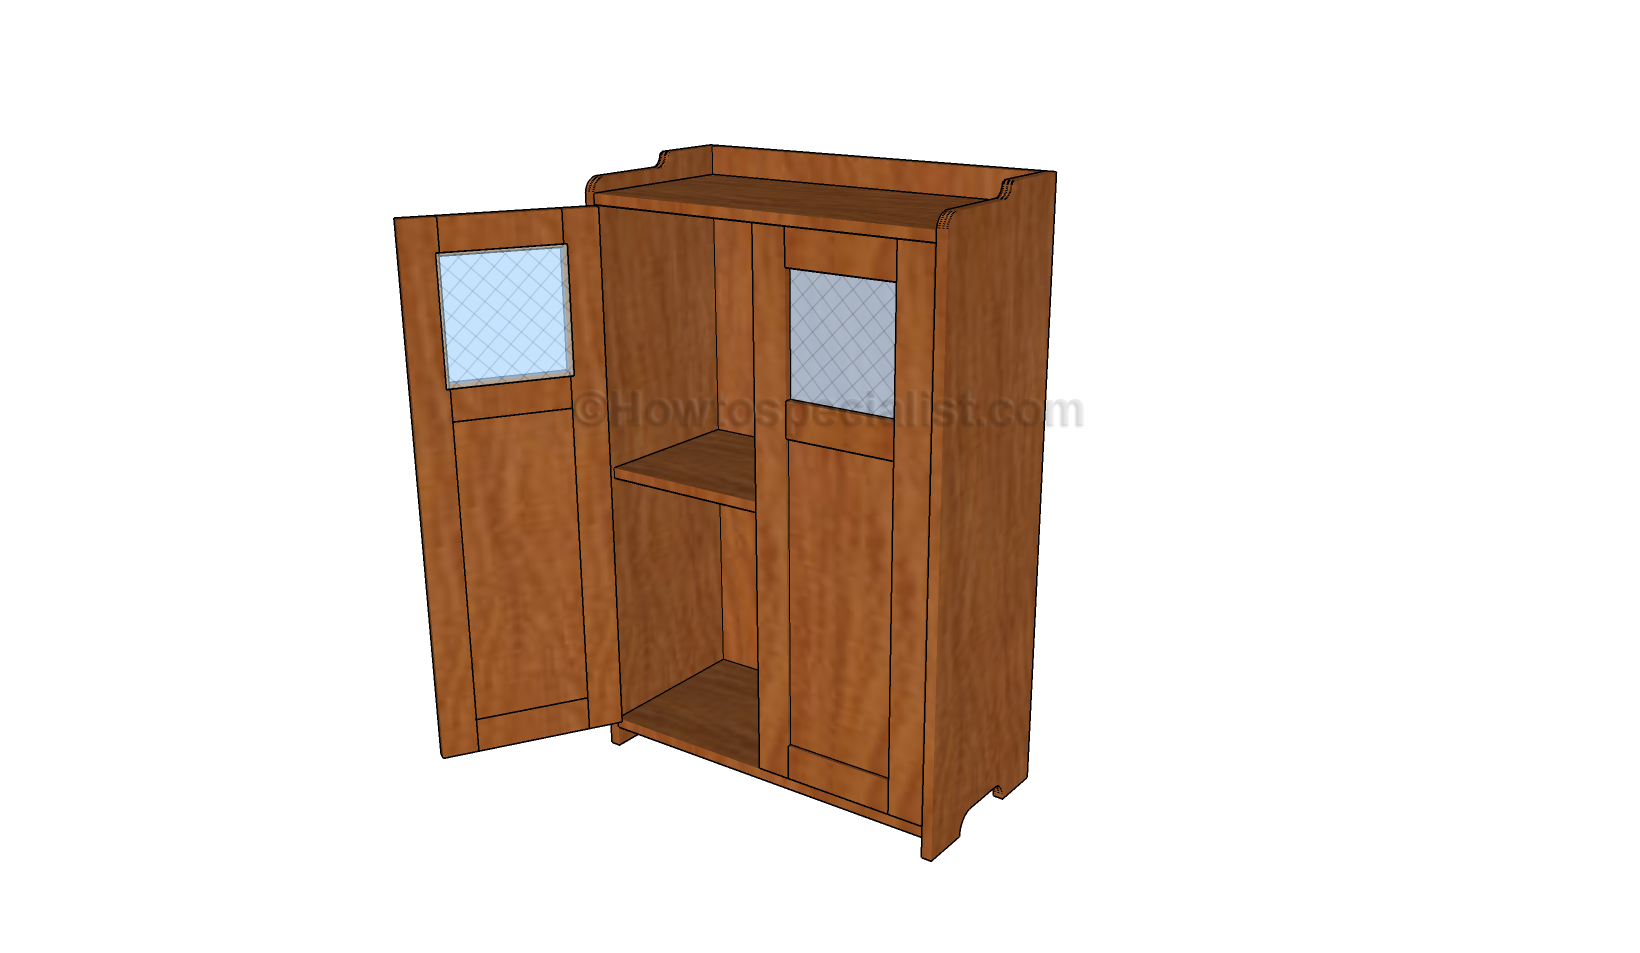 Corner cabinet plans | HowToSpecialist - How to Build ...